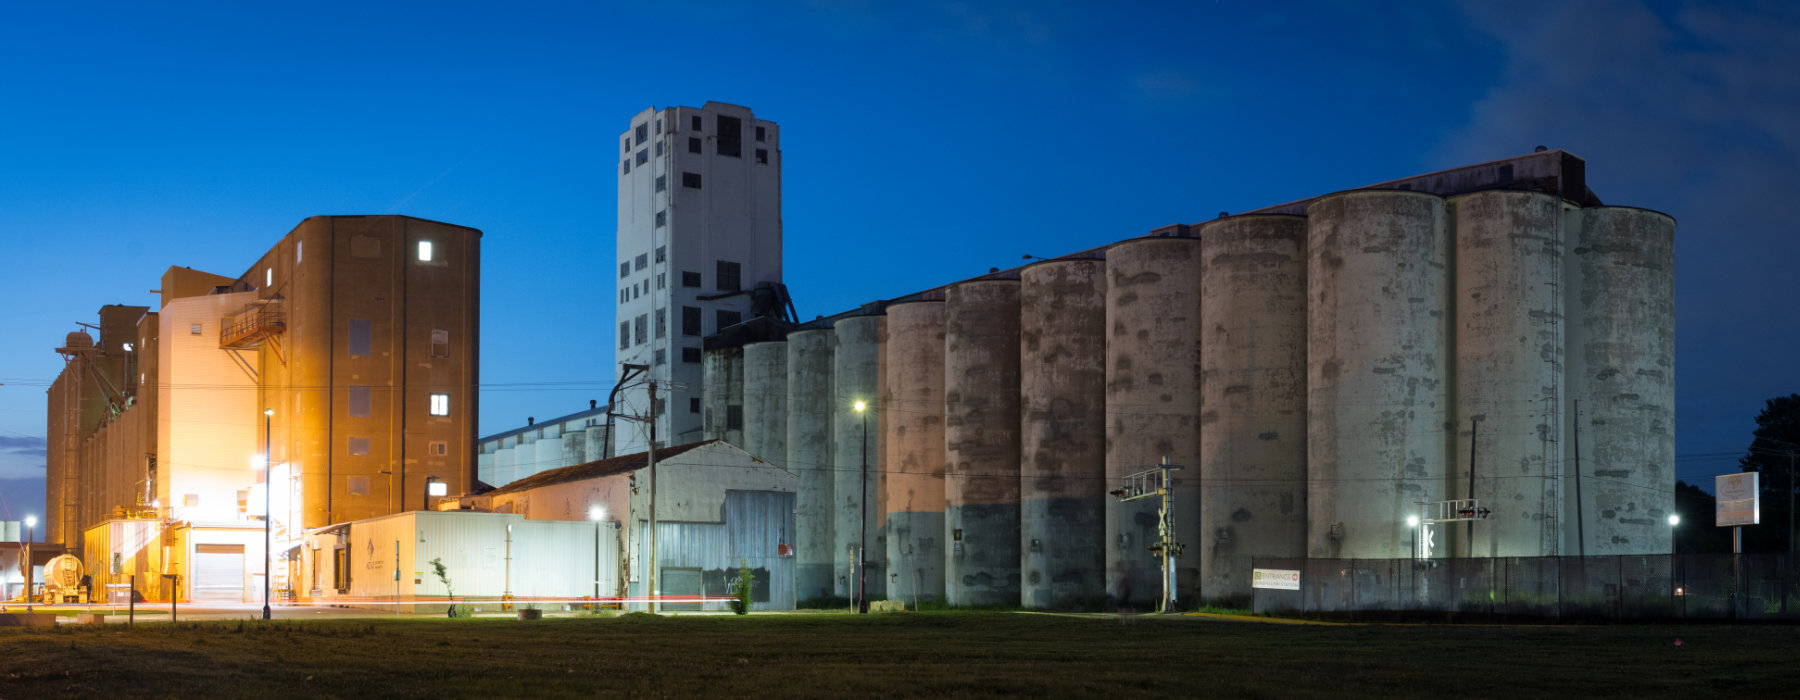 wide angle view of long row of grain elevators with a tall tower in the middle with deep blue sky